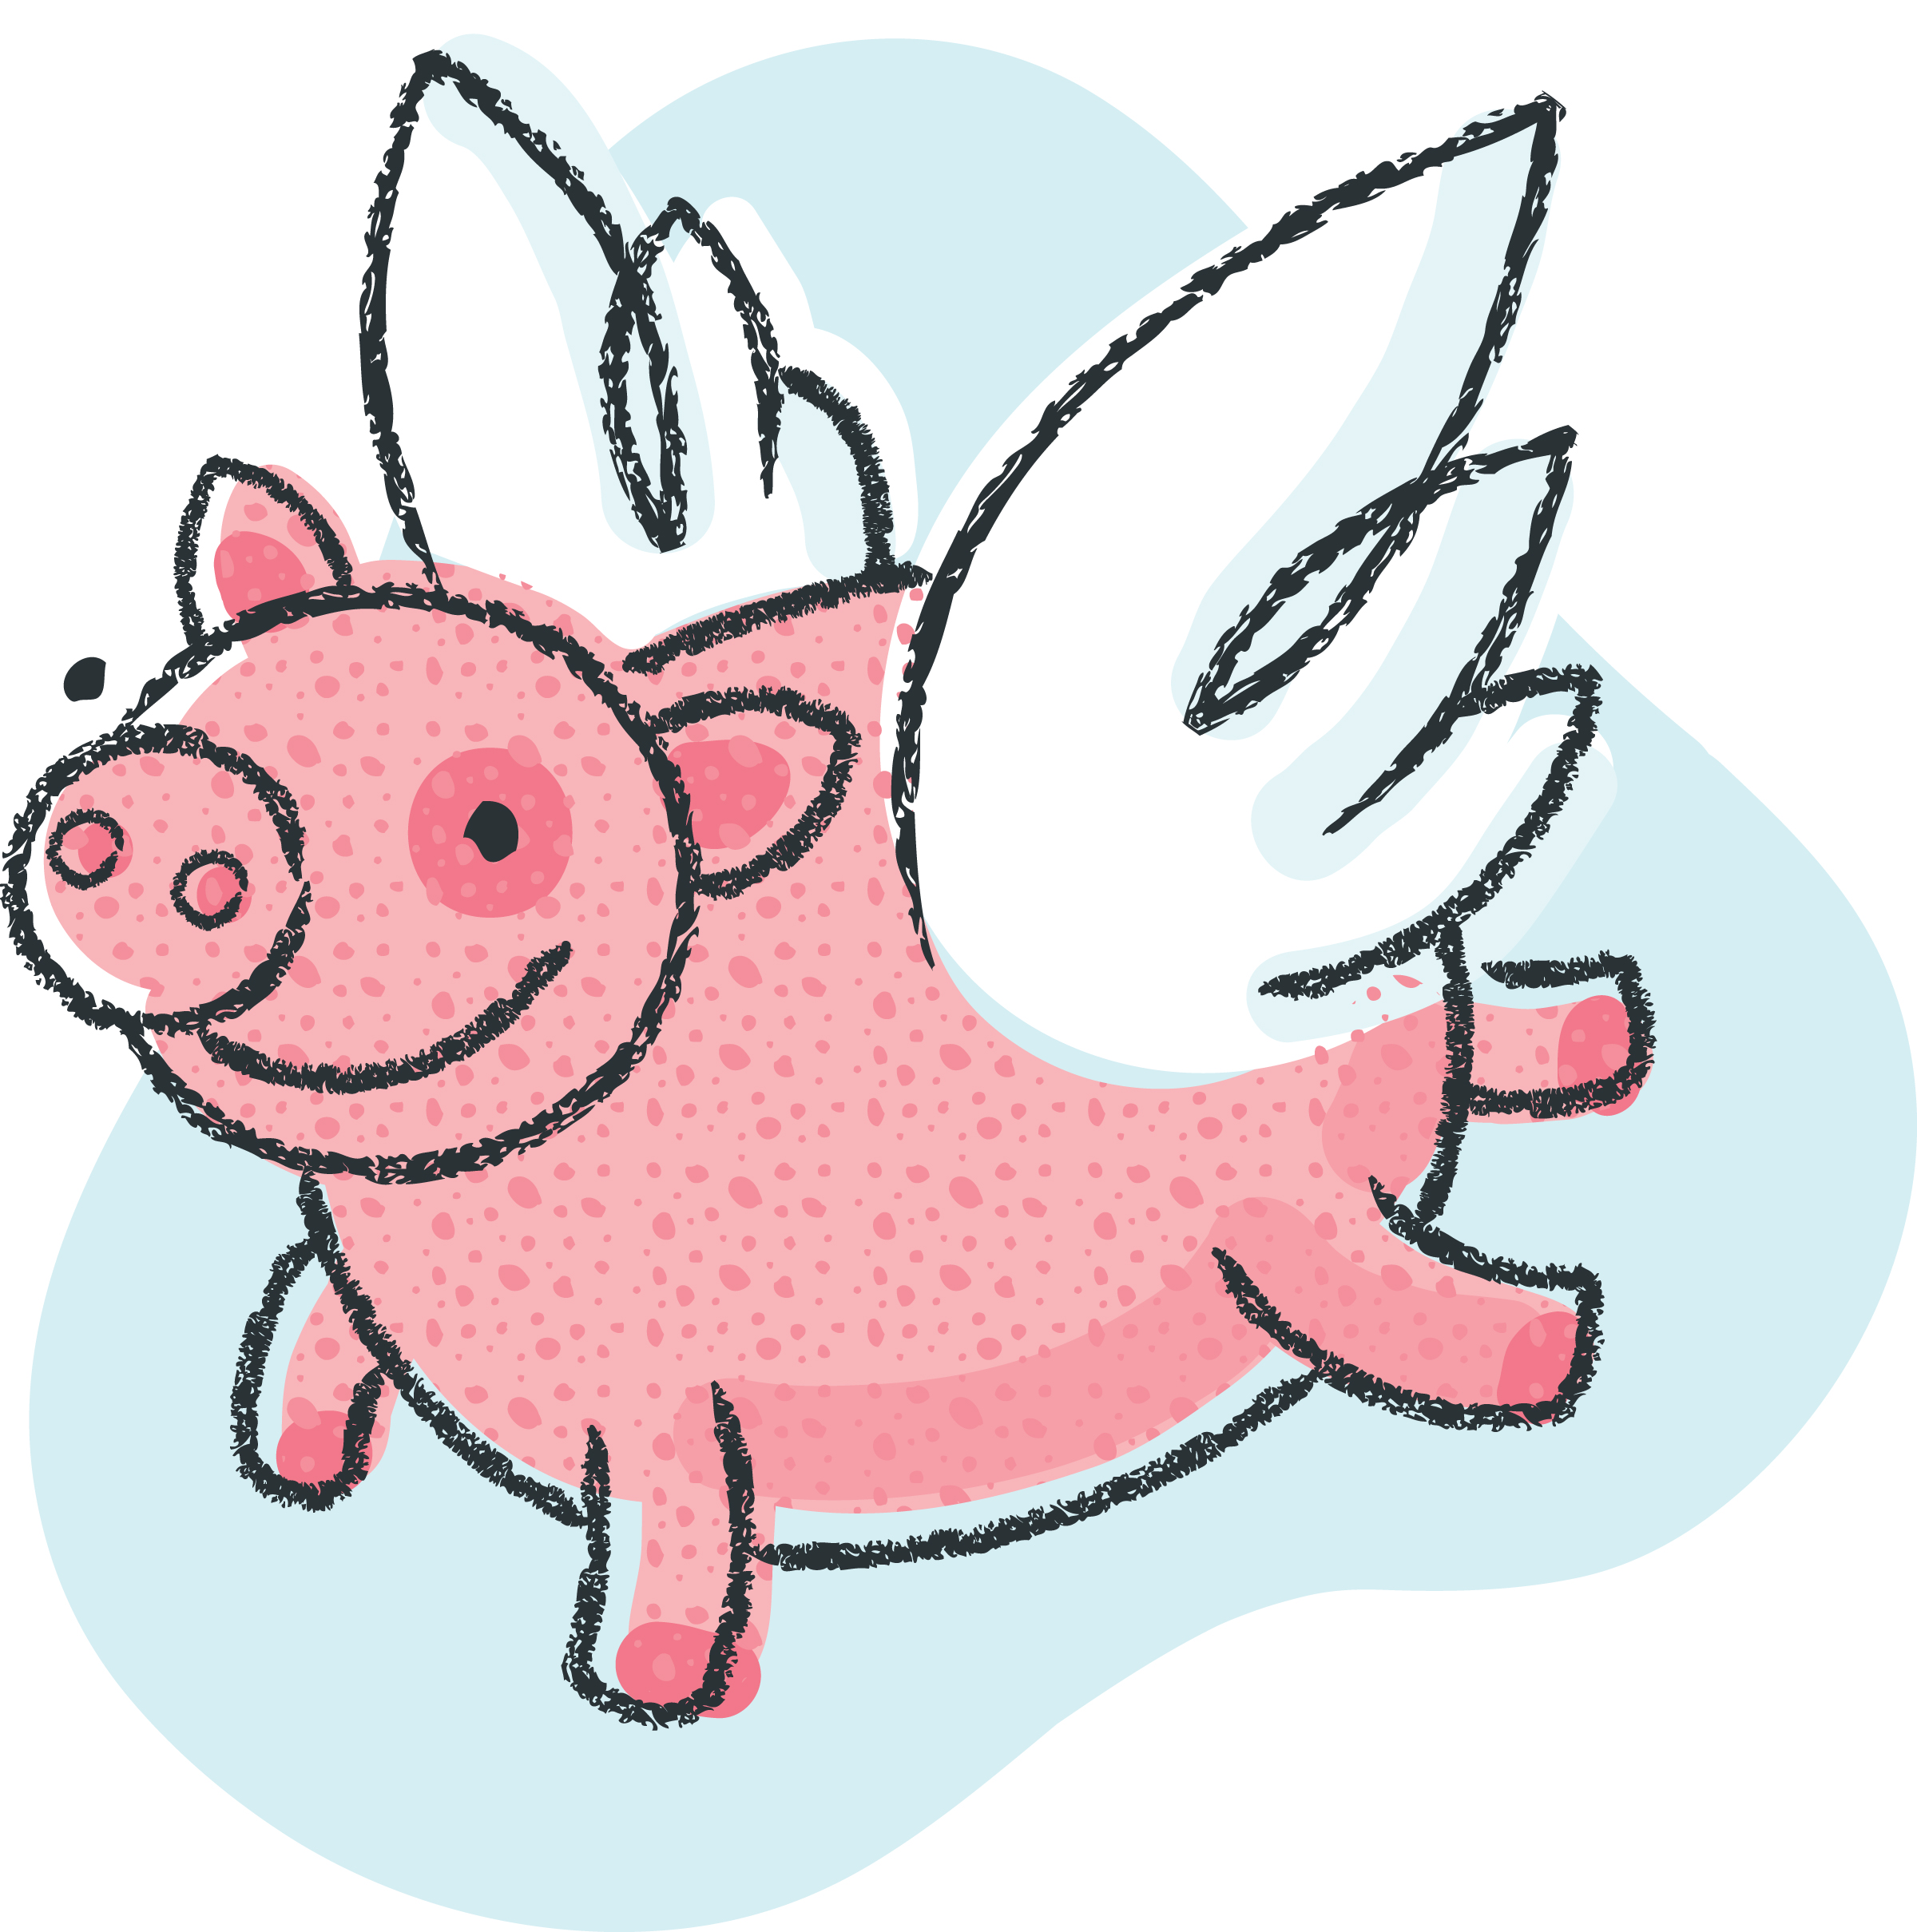 Pig Images Hd Image Clipart